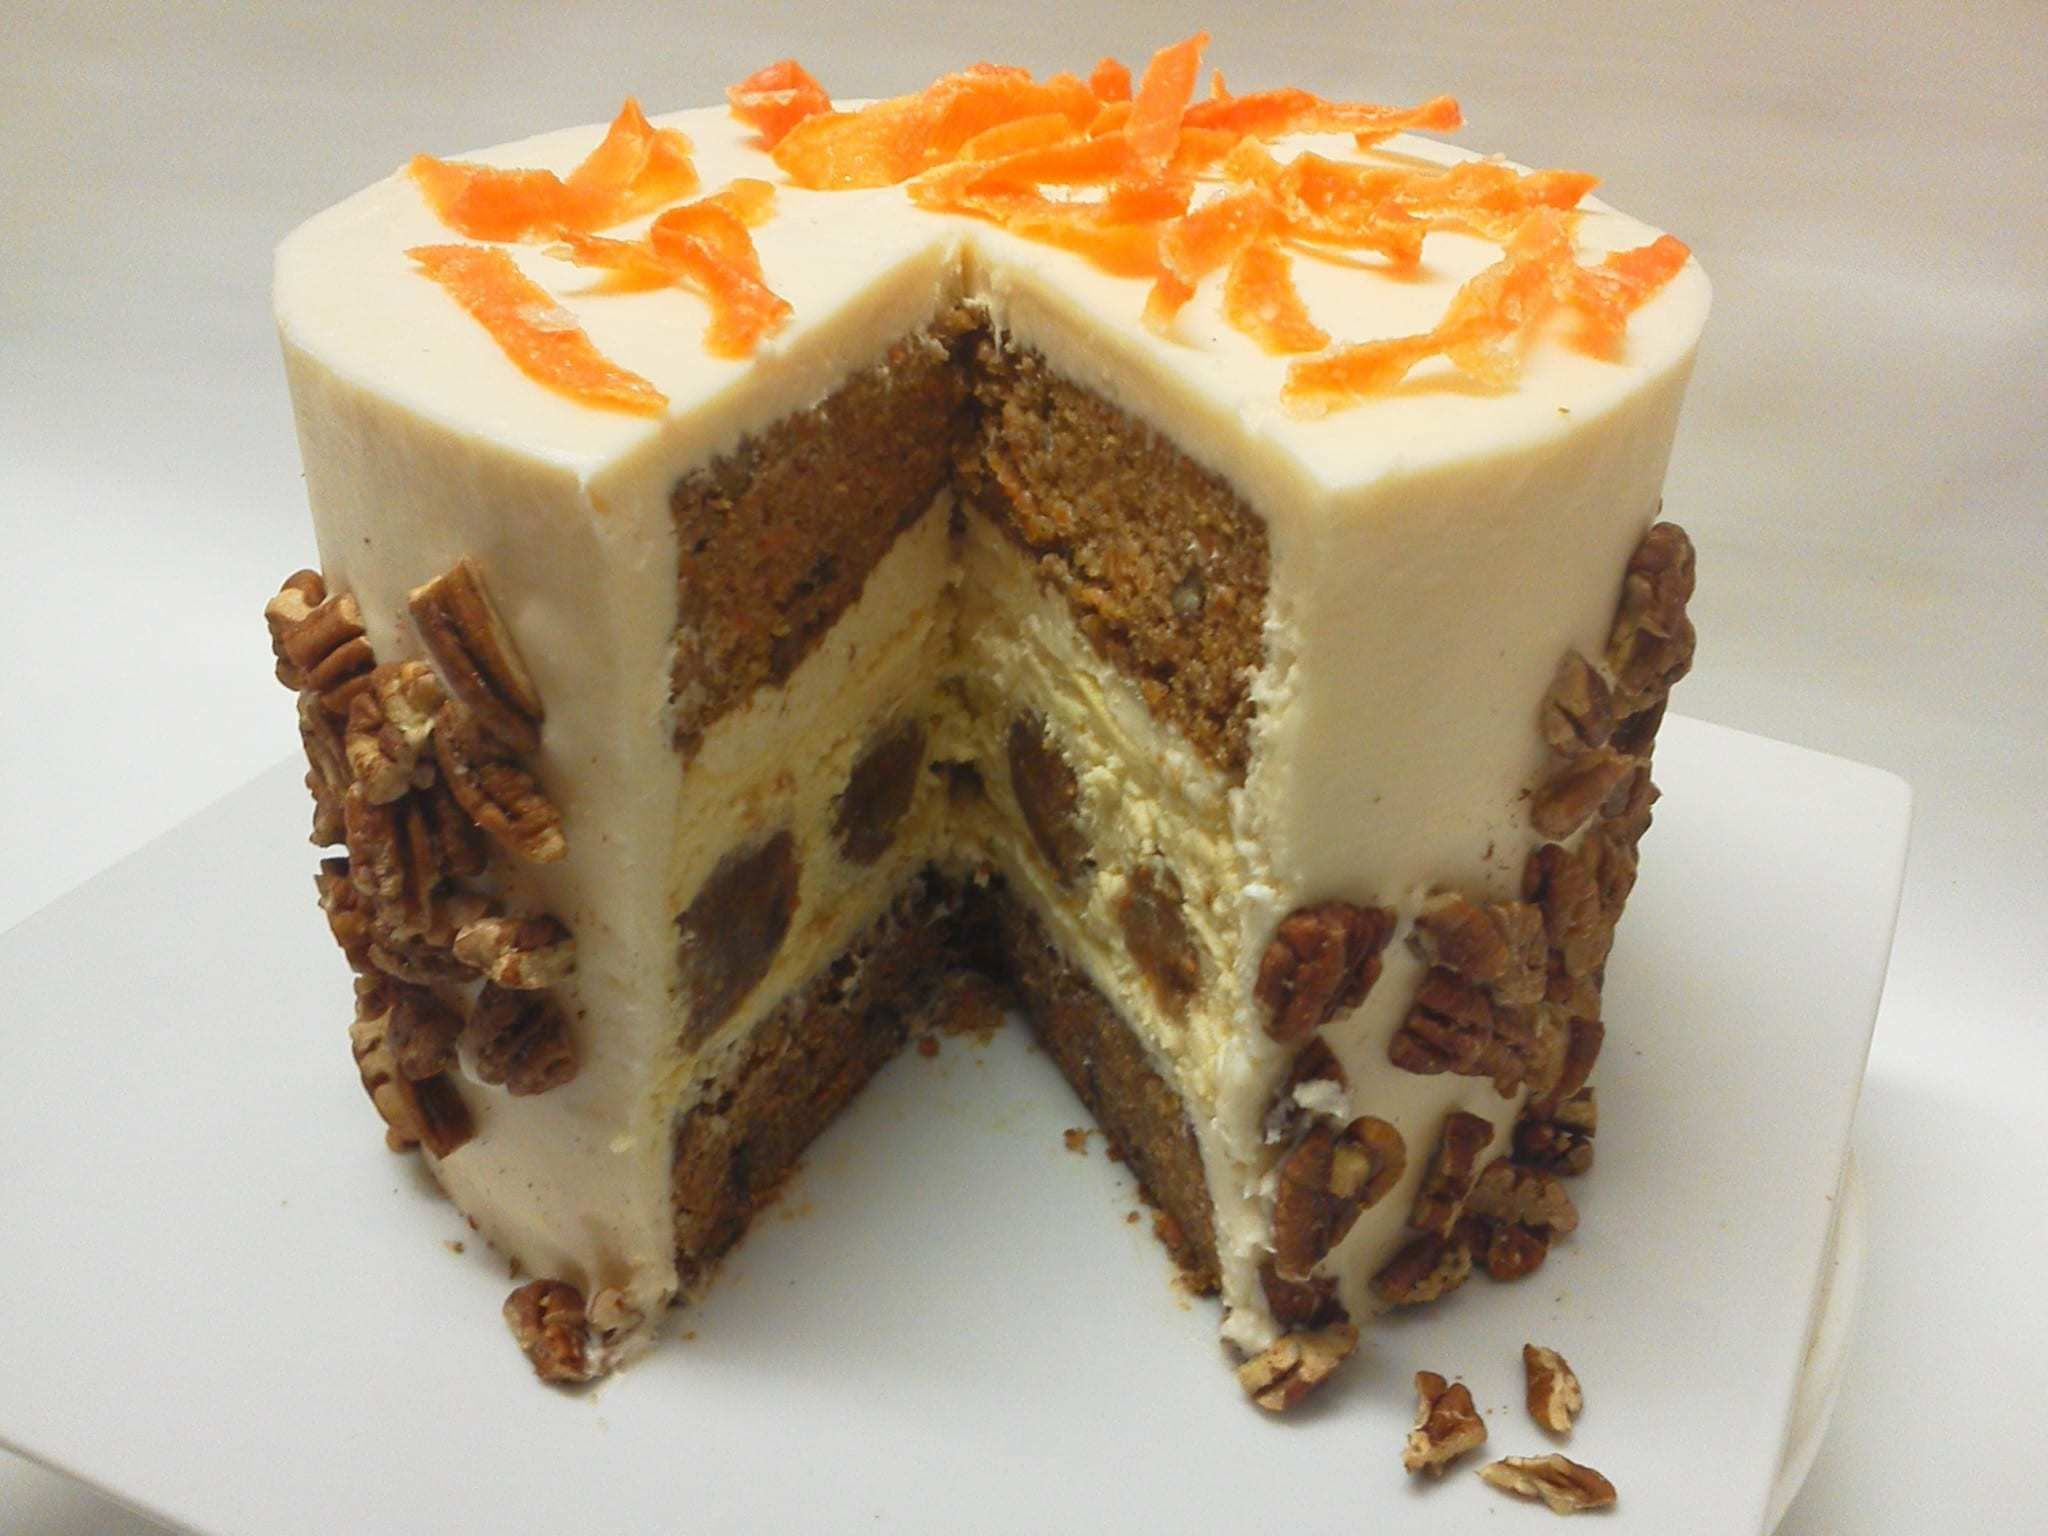 Gourmet Desserts Delivered
 Carrot cake cheesecake delivered